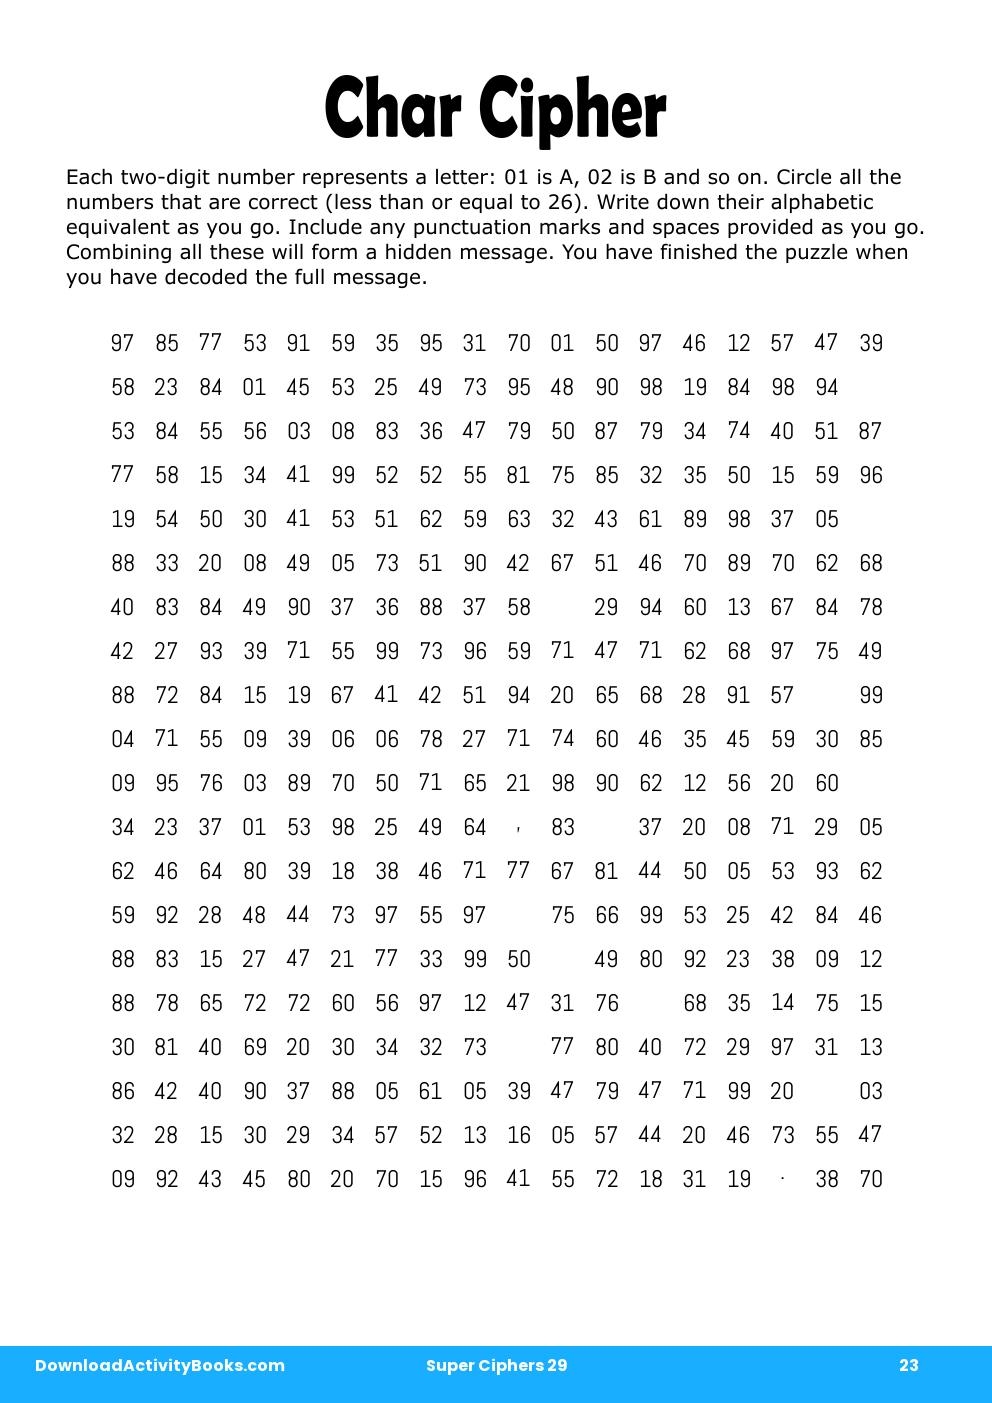 Char Cipher in Super Ciphers 29